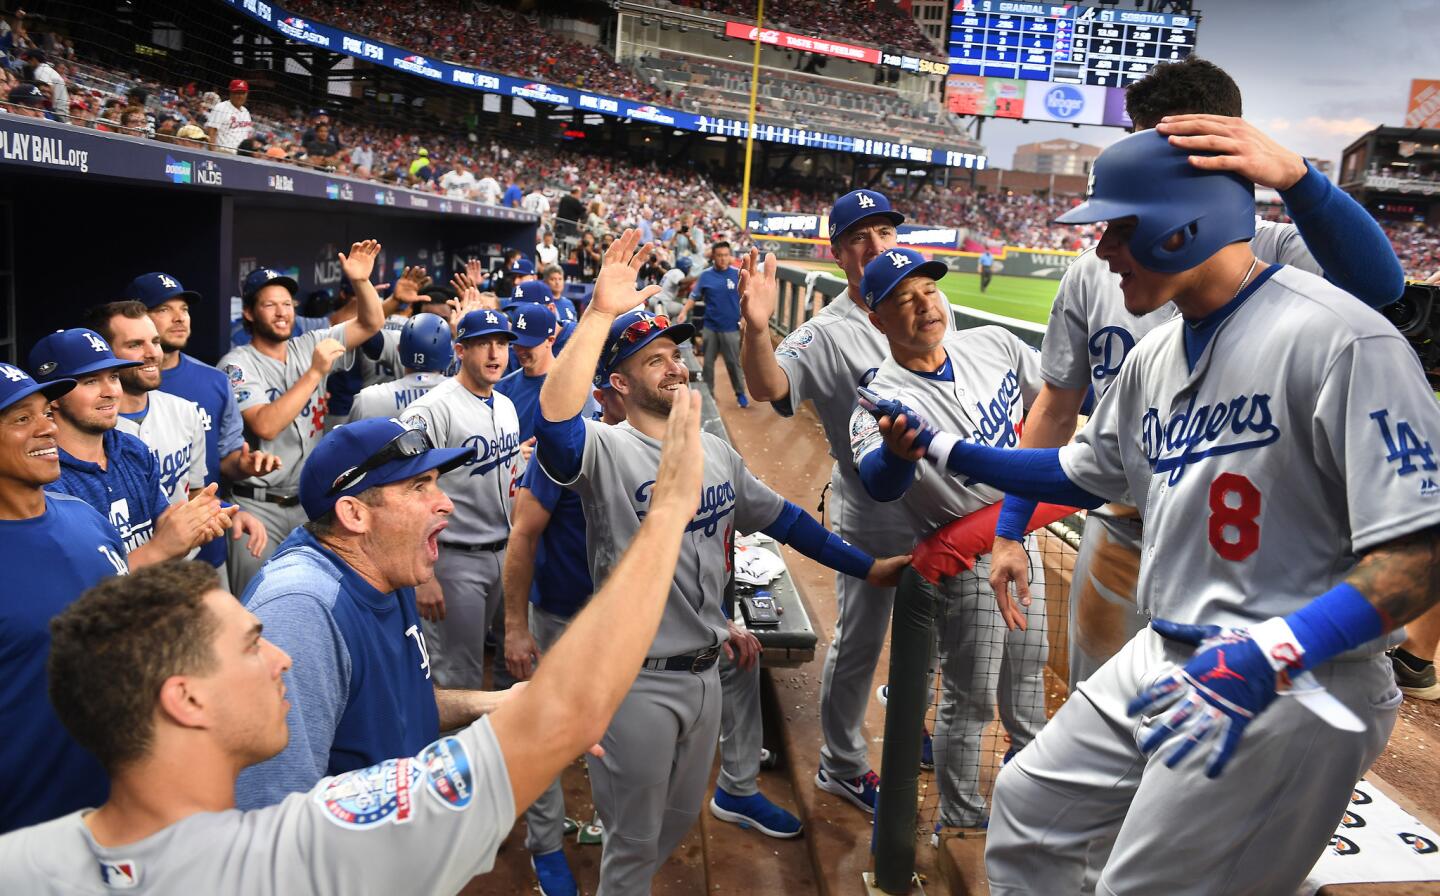 Dodgers shortstop Manny Machado is congratulated by teammates and coaches after hitting a three-run home run in the seventh inning.